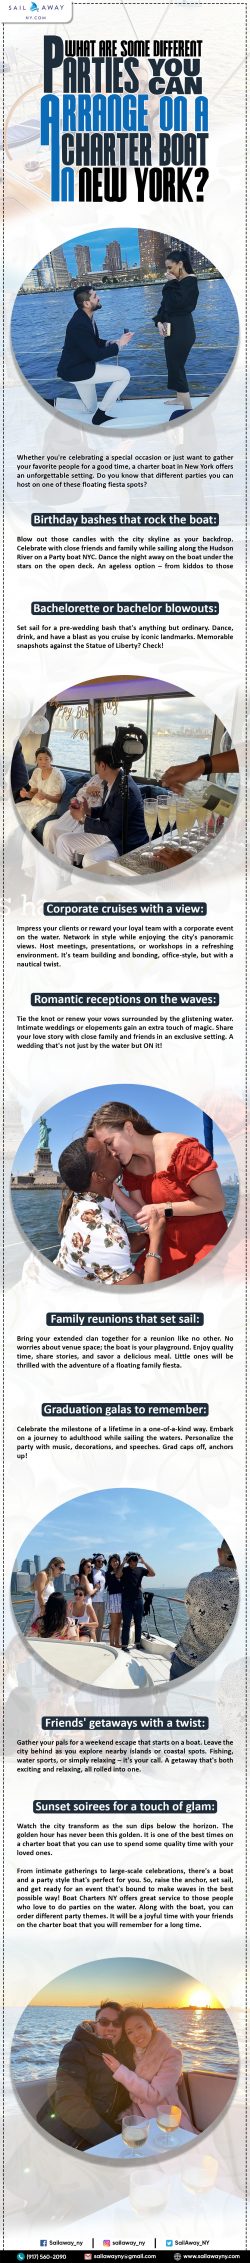 What Are Some Different Parties You Can Arrange On A Charter Boat In New York?